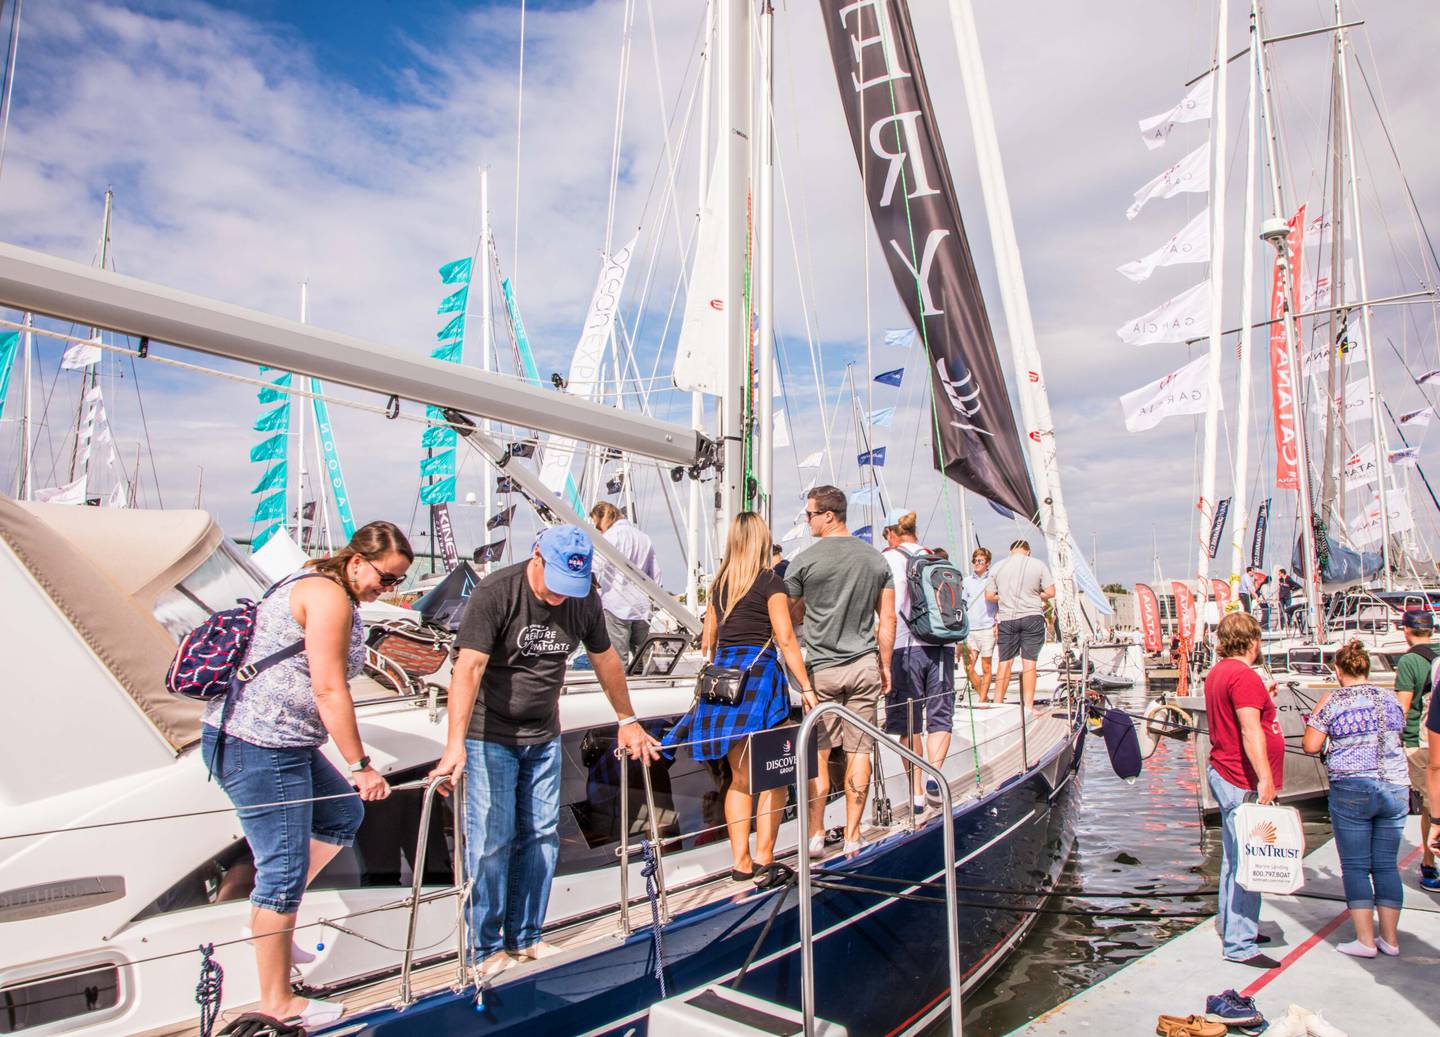 The Annapolis Spring Sailboat Show runs Friday through Sunday with boats in the water and on shore, along with 100 exhibitors, lectures, music and food.